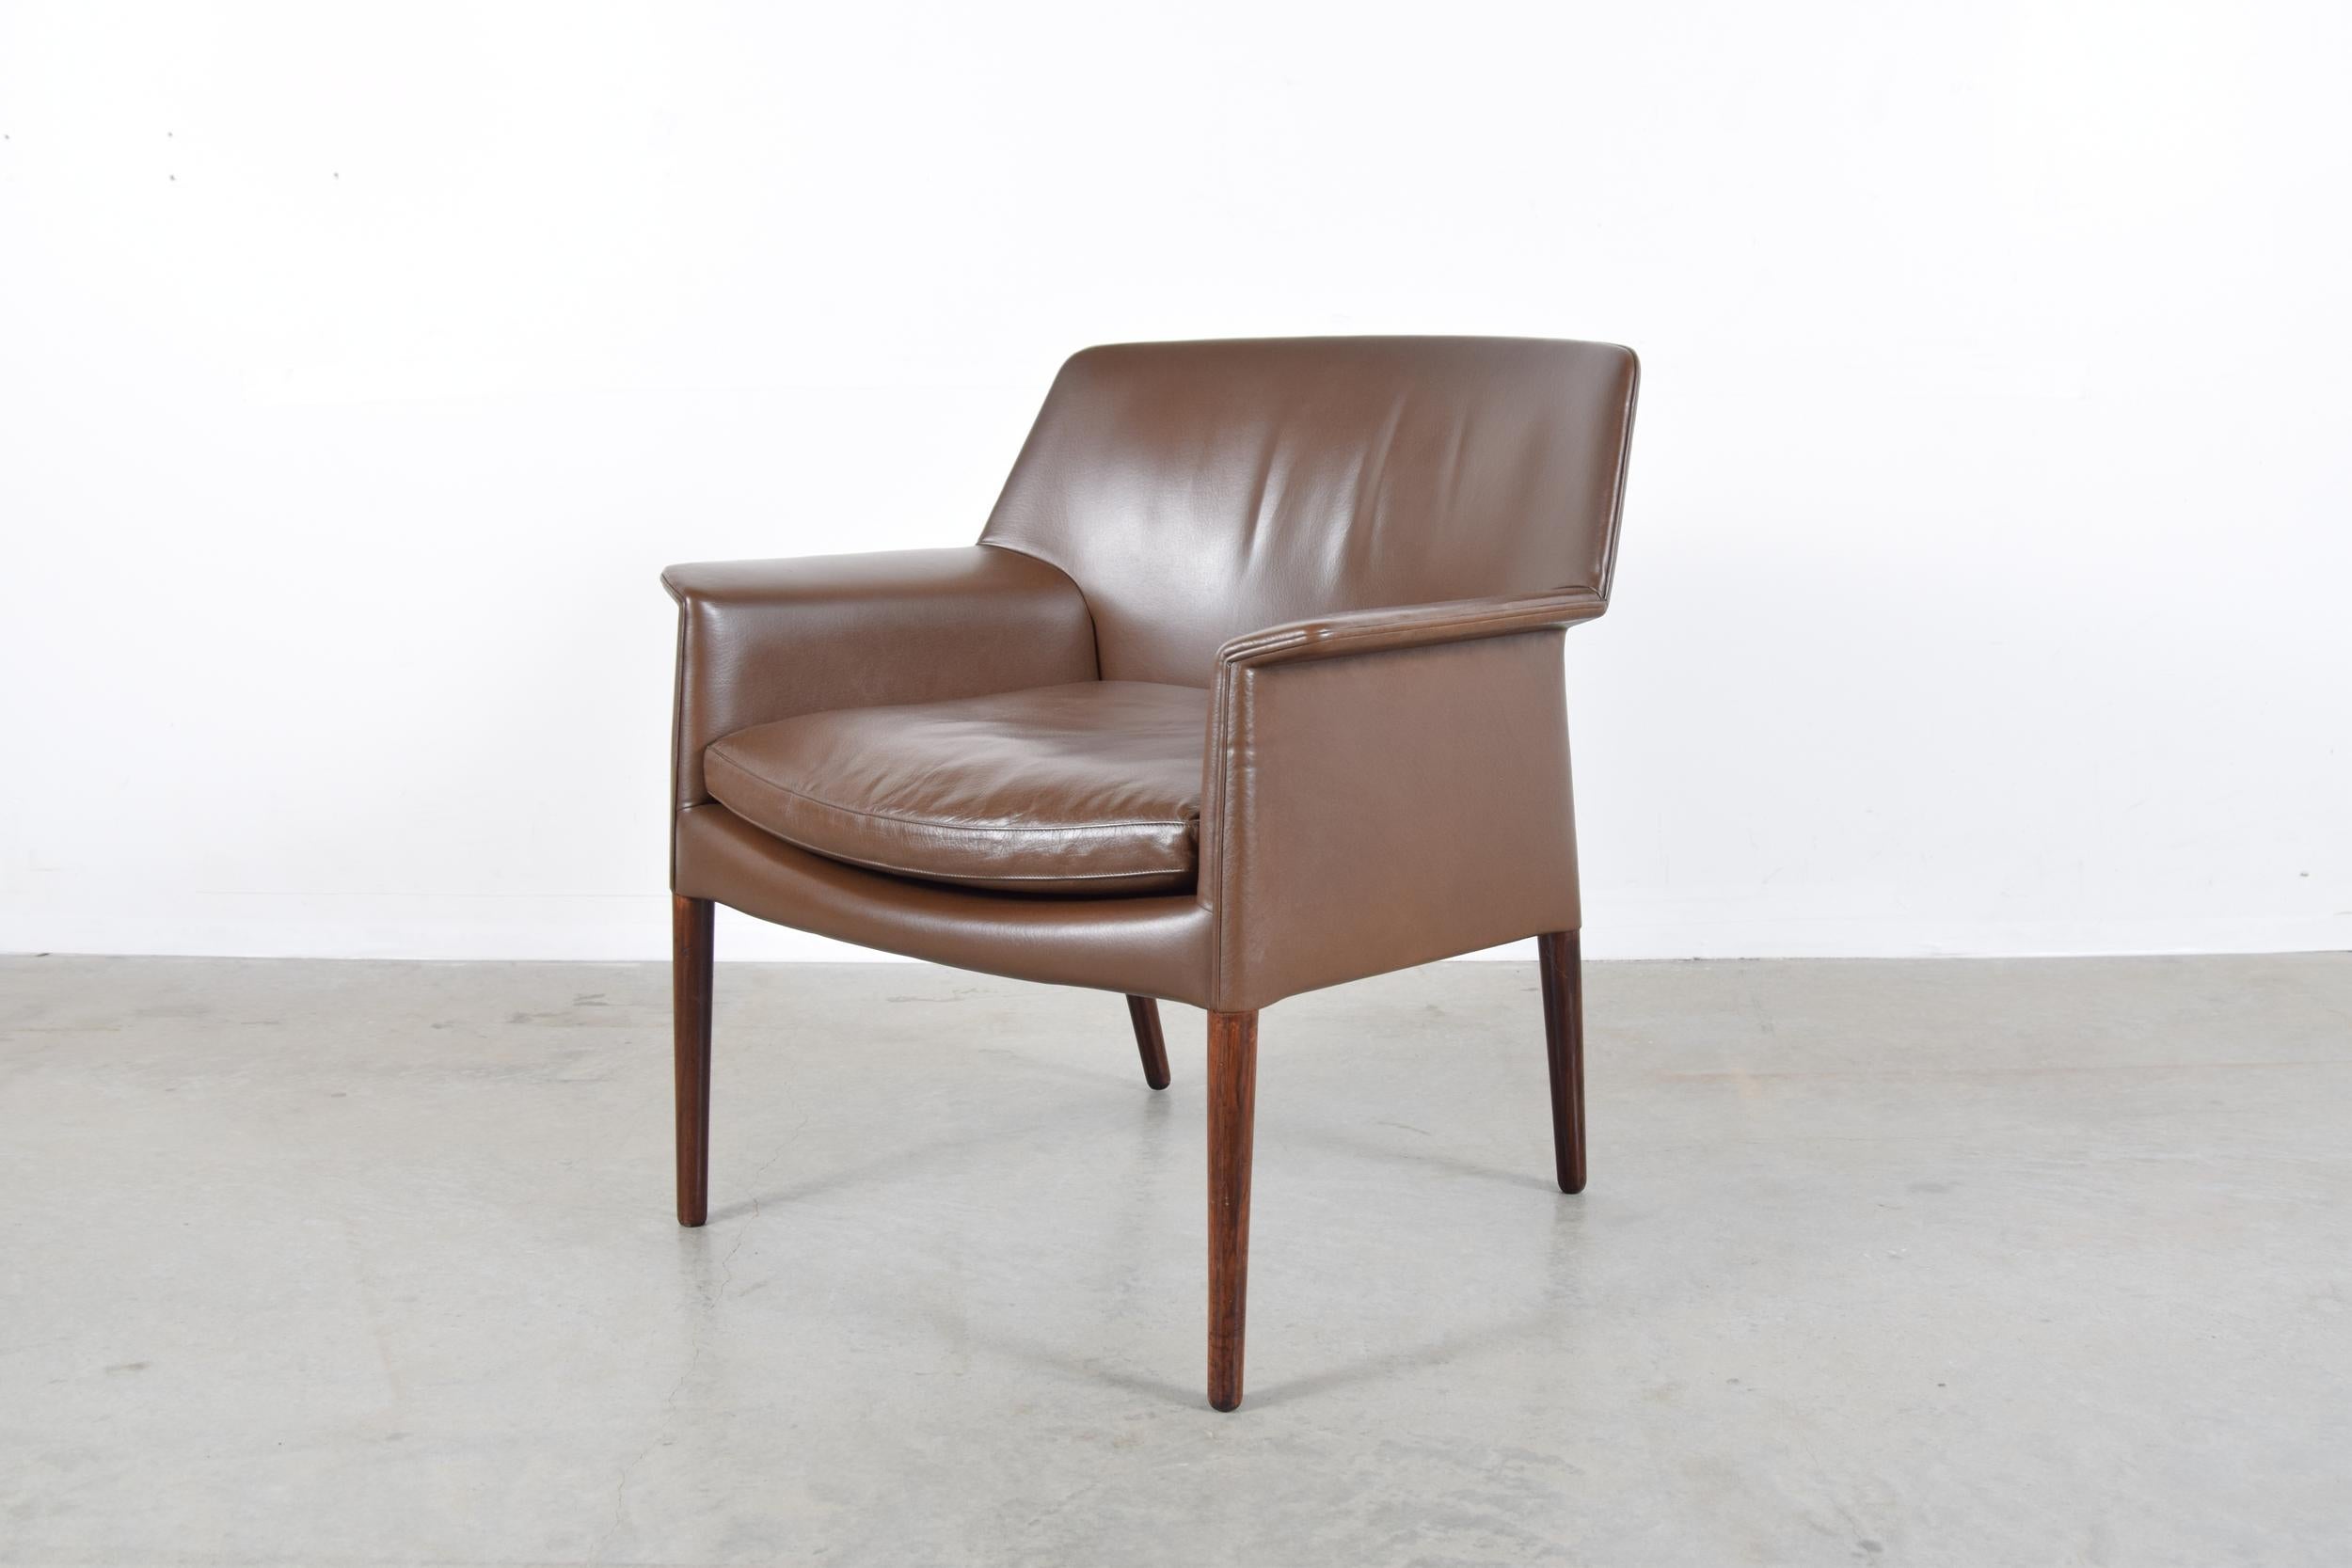 Lounge chair in leather and rosewood, designed by Ejner Larsen and Aksel Bender Madsen, and produced in Denmark by Ludvig Pontoppidan, circa 1958.